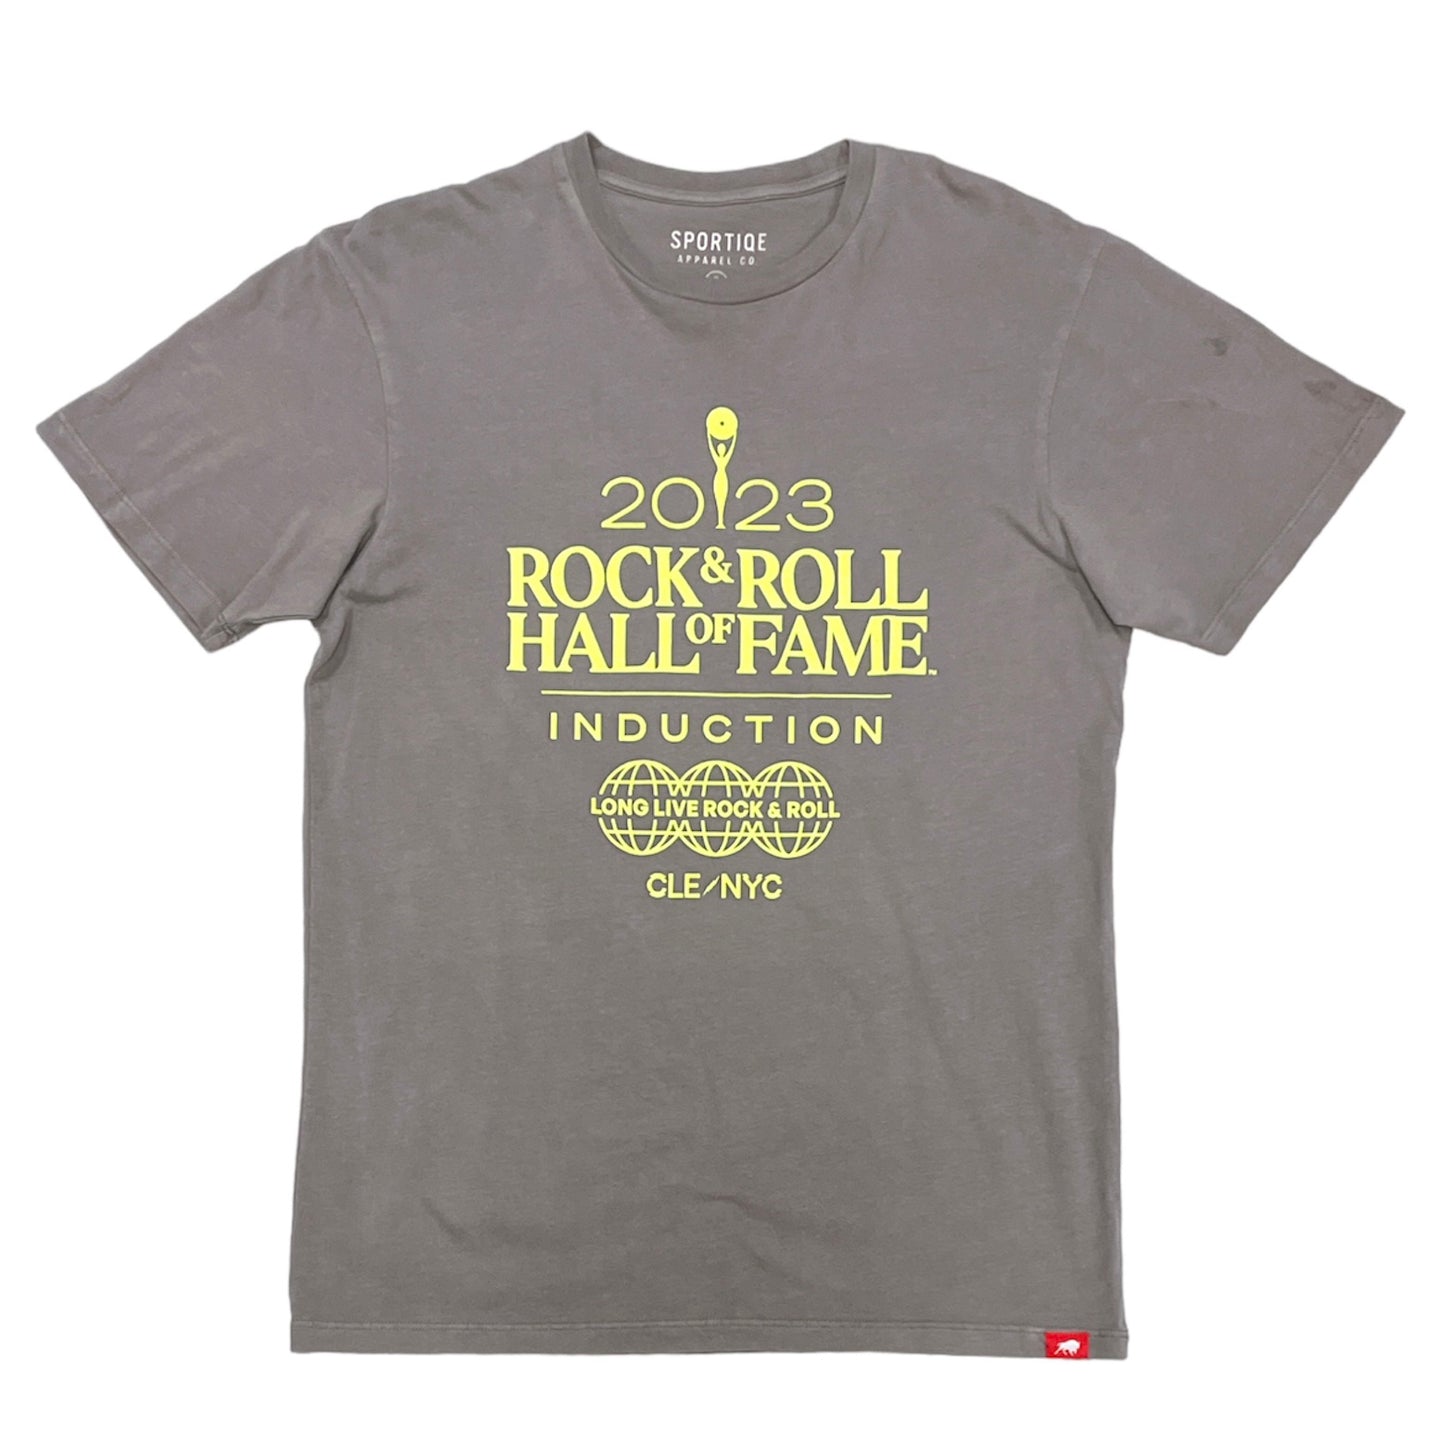 ROCK HALL 2023 - INDUCTION CLASS ENCYCLOPEDIA T-SHIRT - CEREMONY EXCLUSIVE